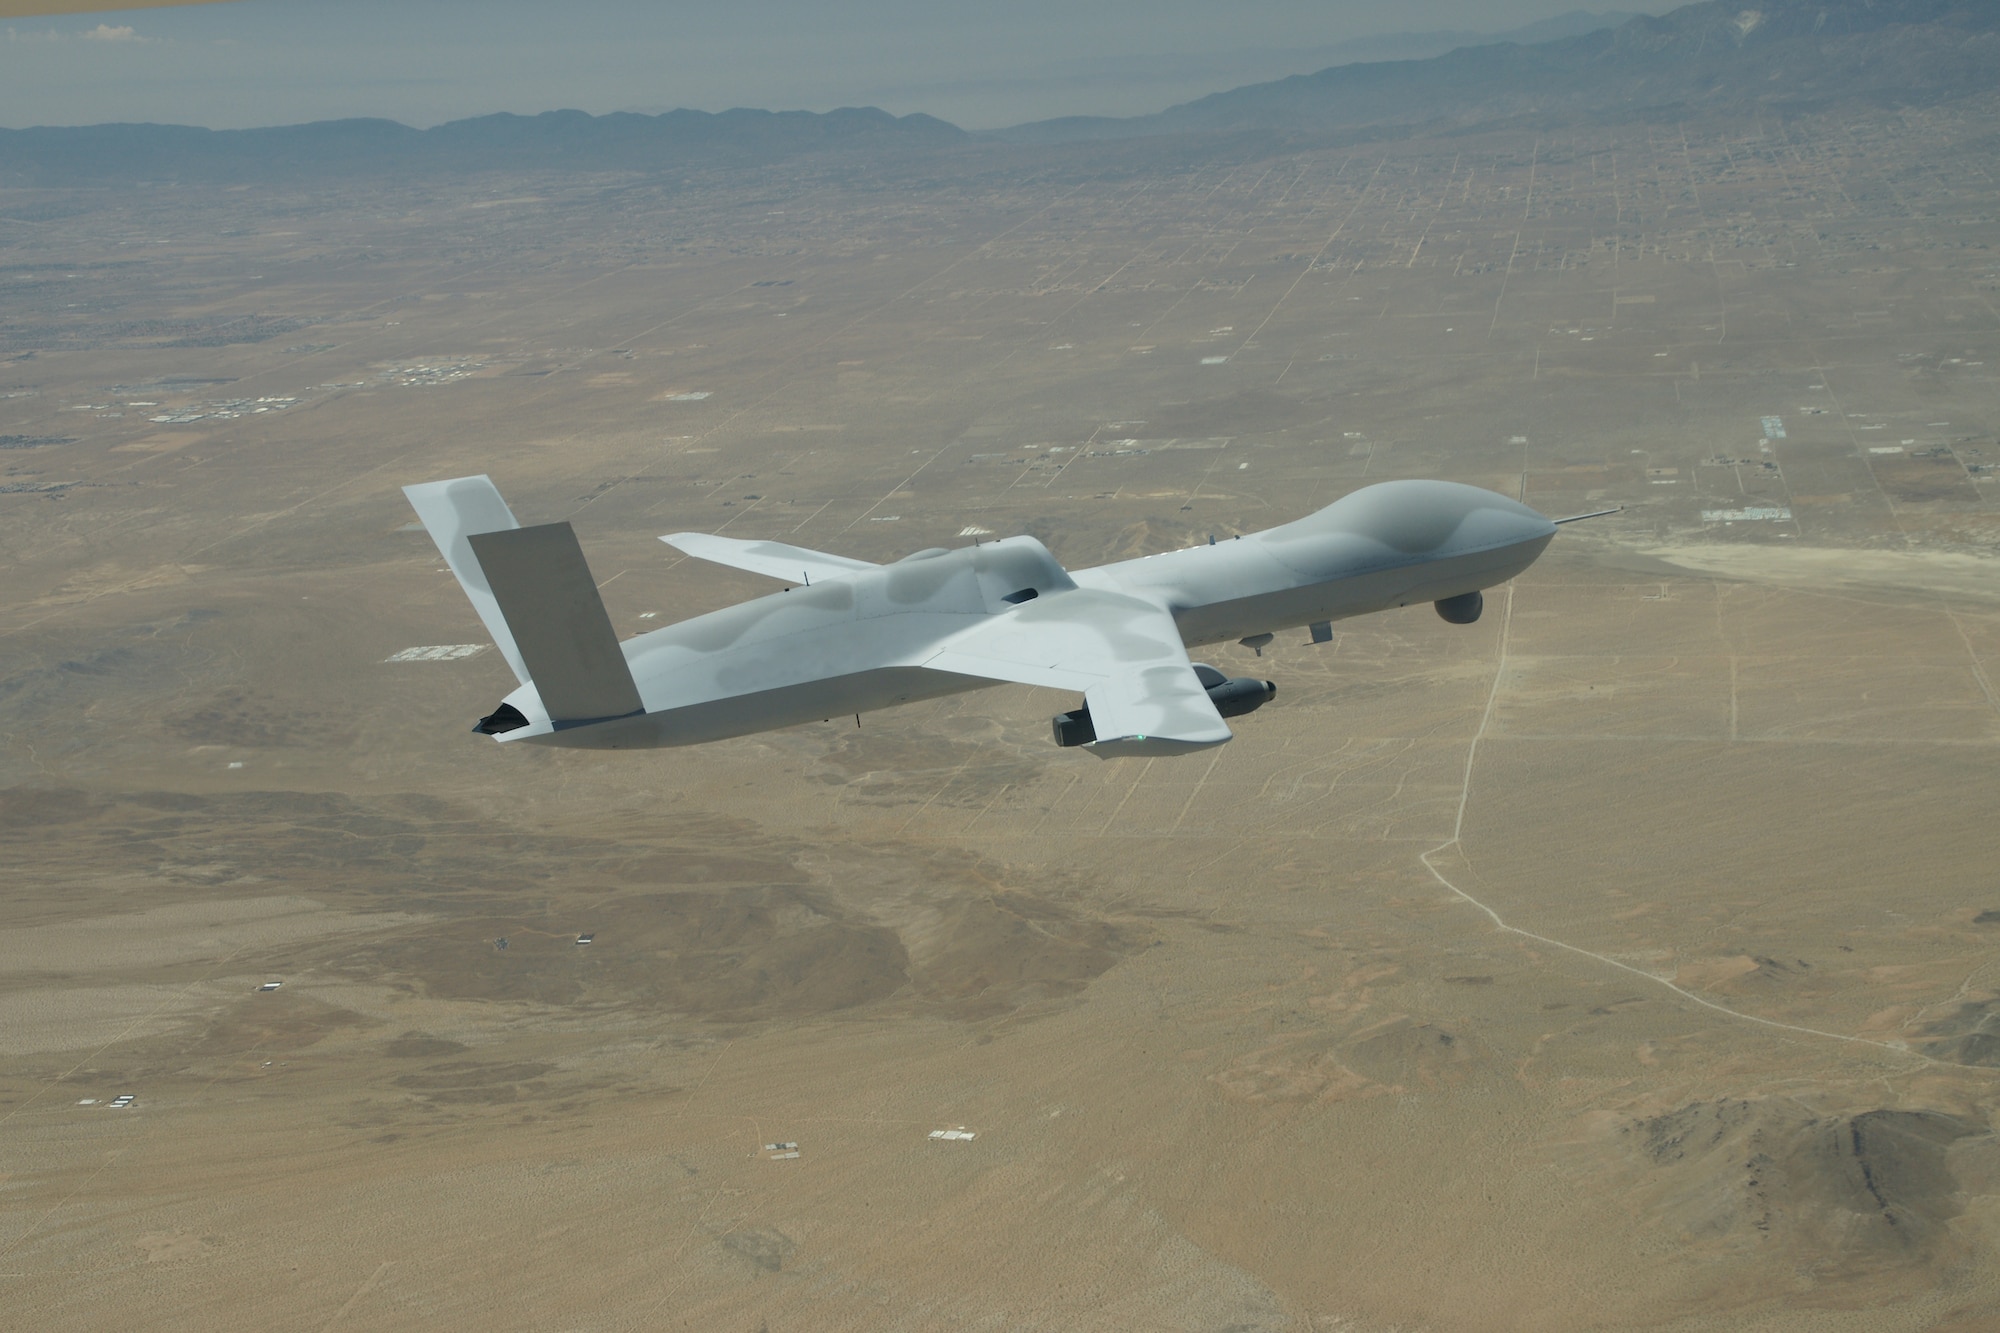 A General Atomics MQ-20 Avenger unmanned vehicle returns to El Mirage Airfield, Calif. June 24, 2021. The MQ-20 successfully participated in Edwards Air Force Base’s Orange Flag 21-2 to test the Skyborg Autonomy Core System. (Photo courtesy of General Atomics)